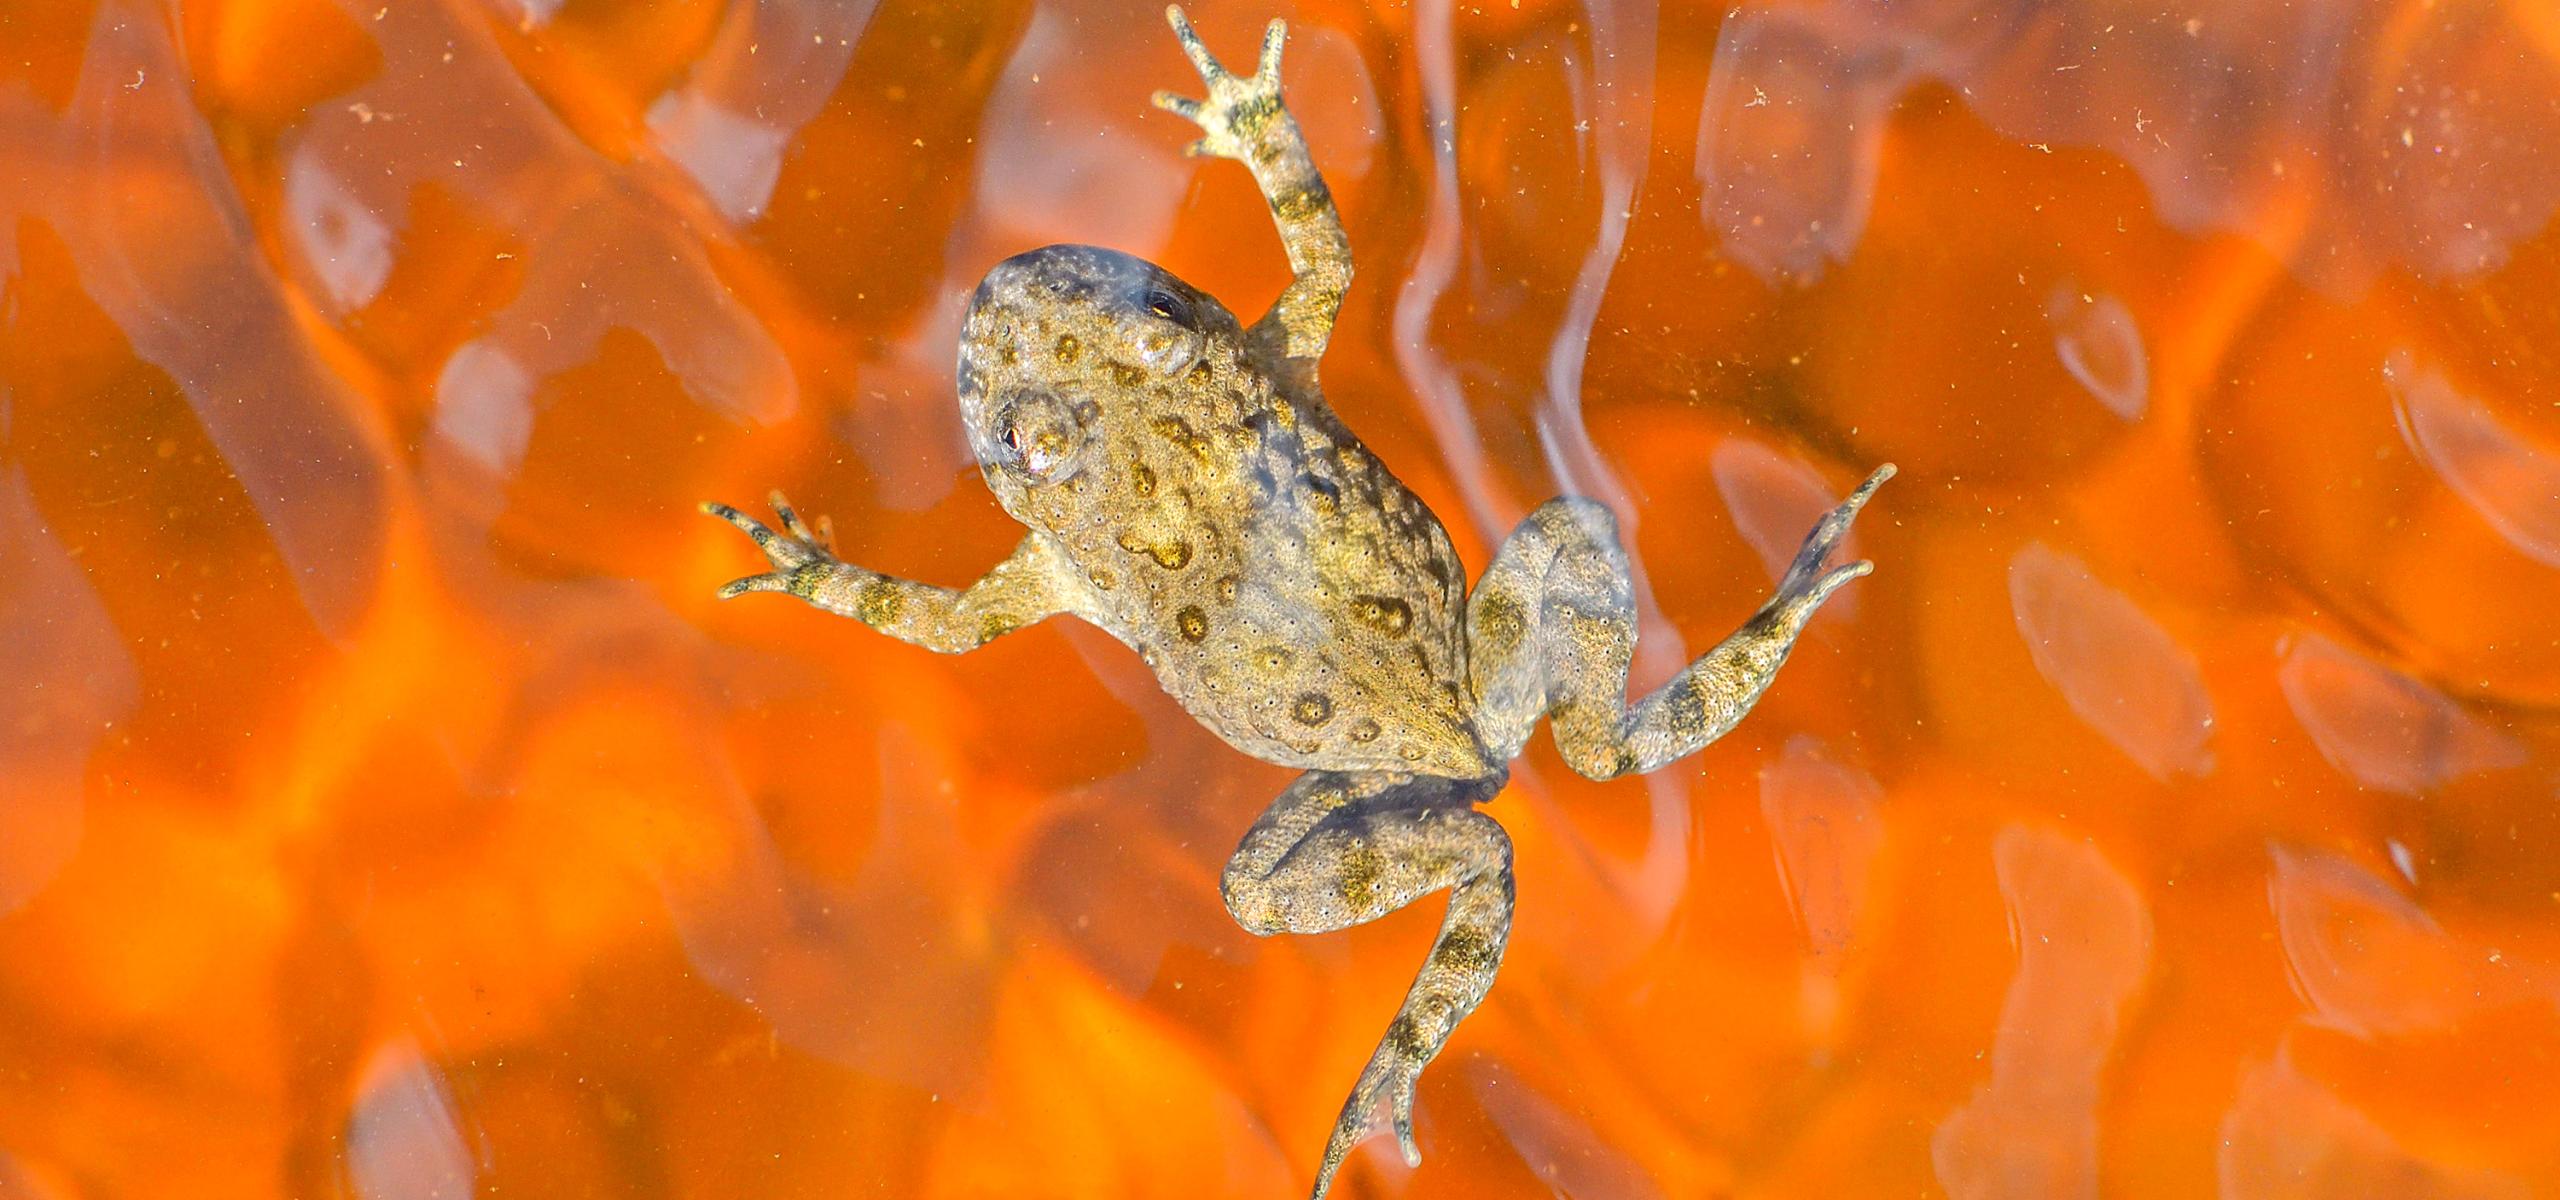 Yellow-bellied toad in the water.